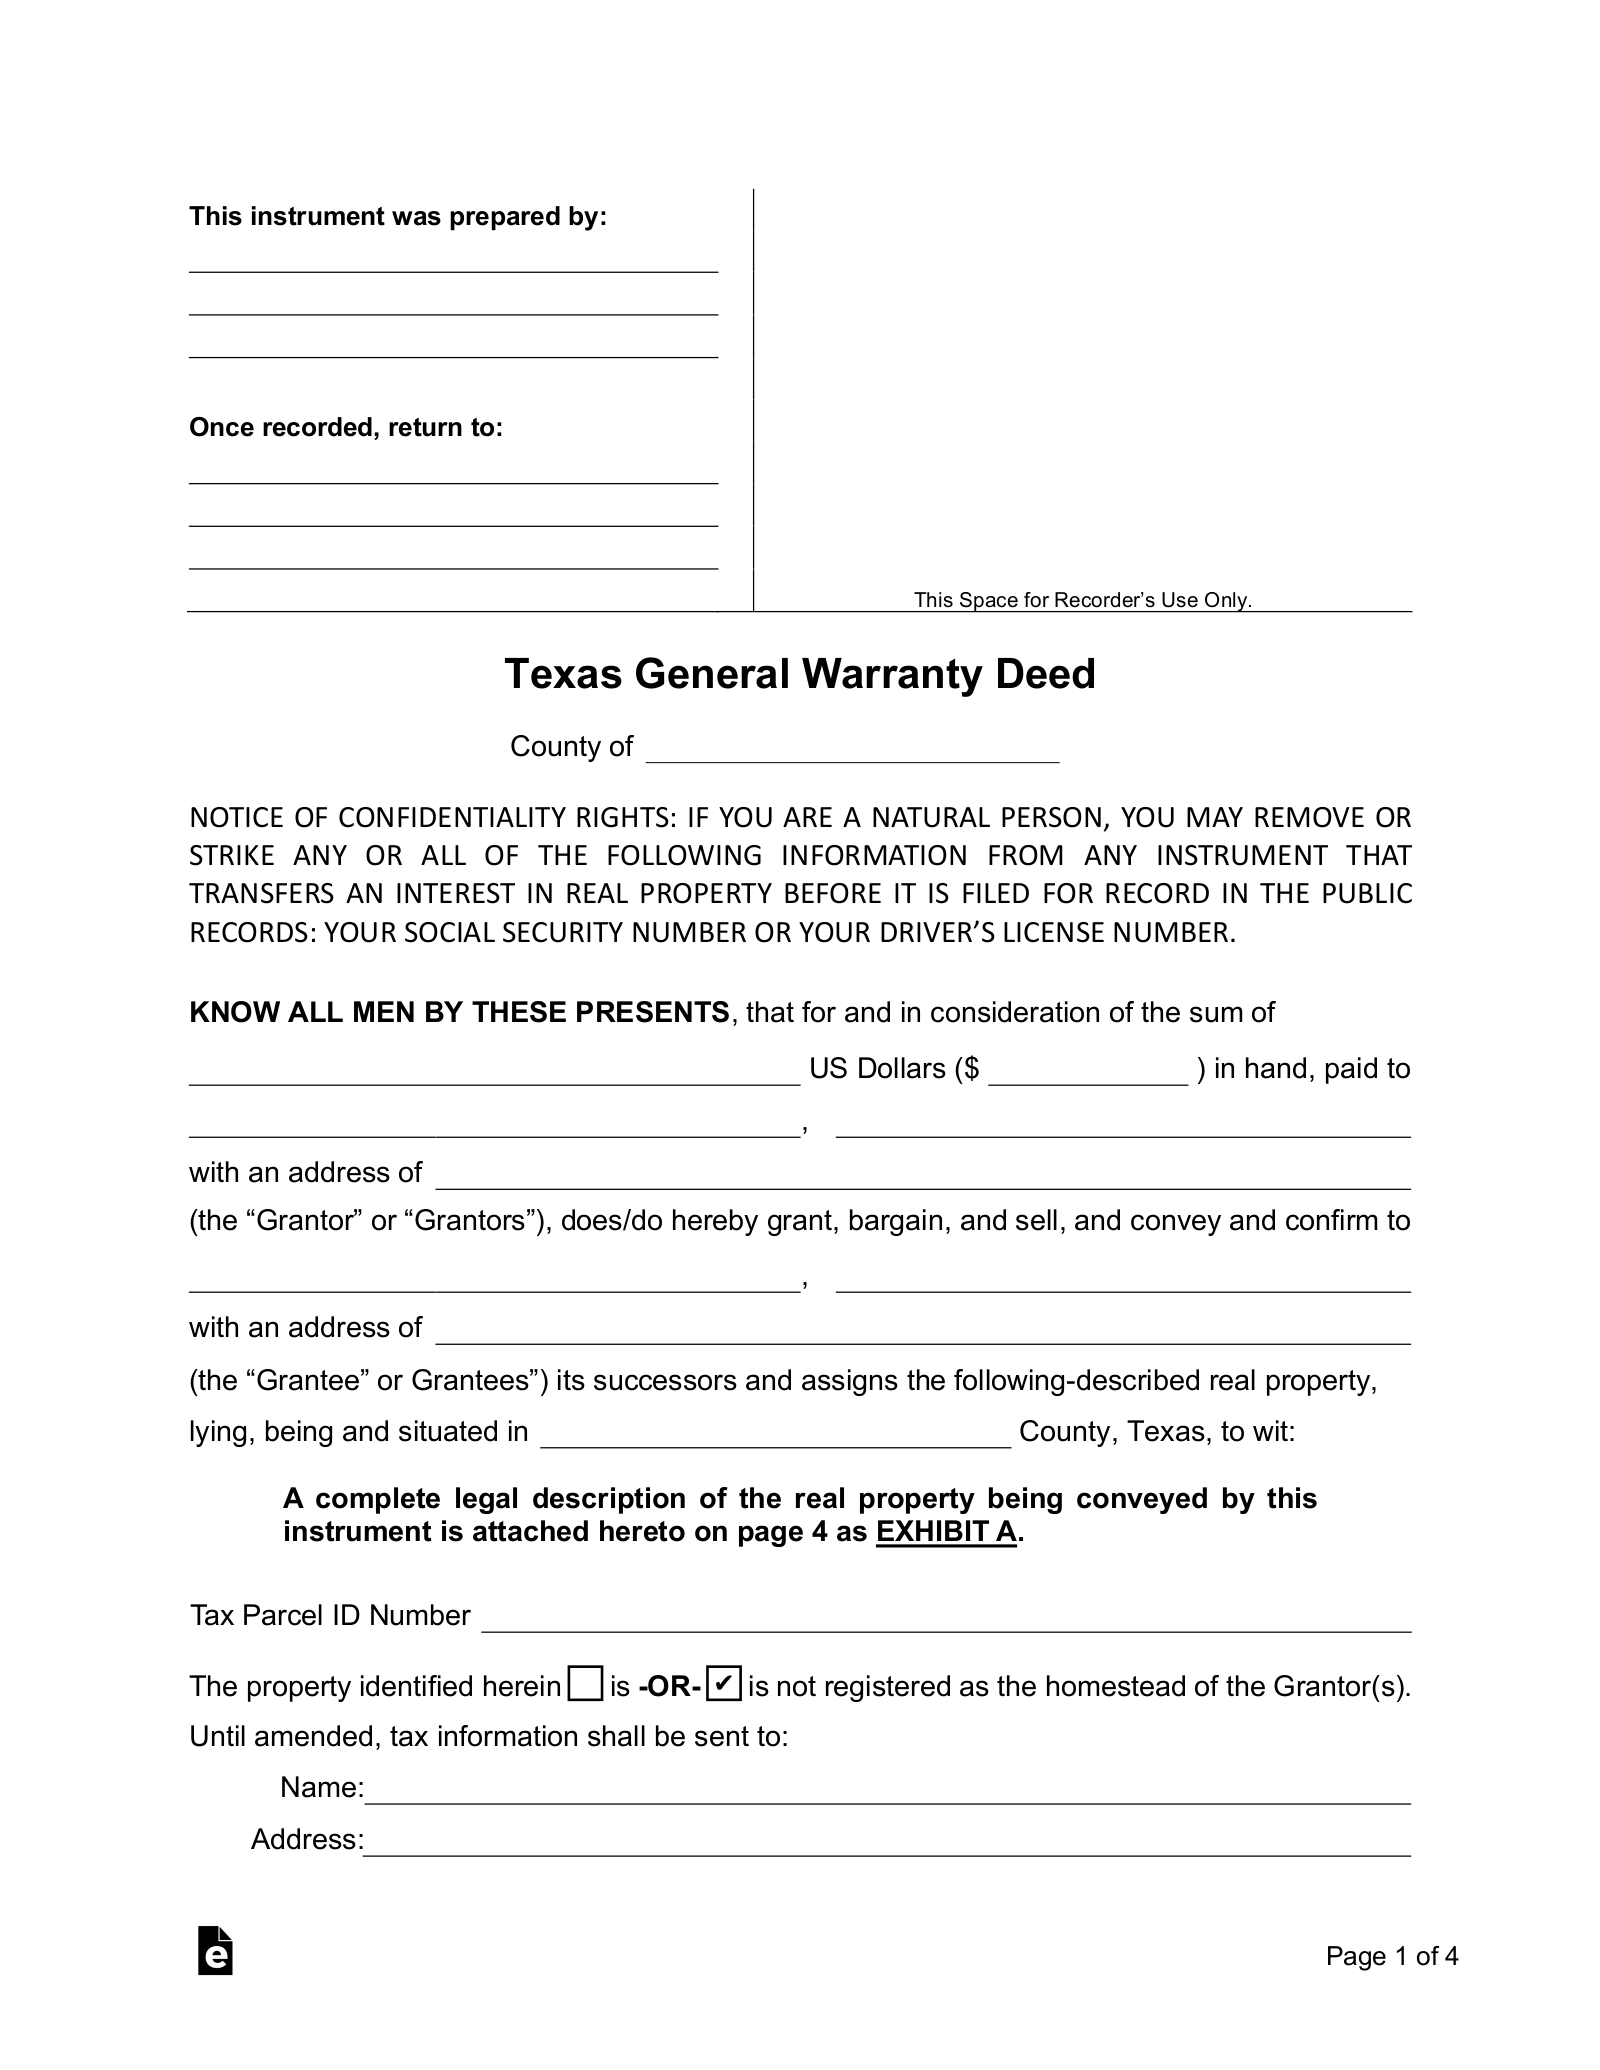 free-printable-gift-deed-form-texas-printable-forms-free-online-my